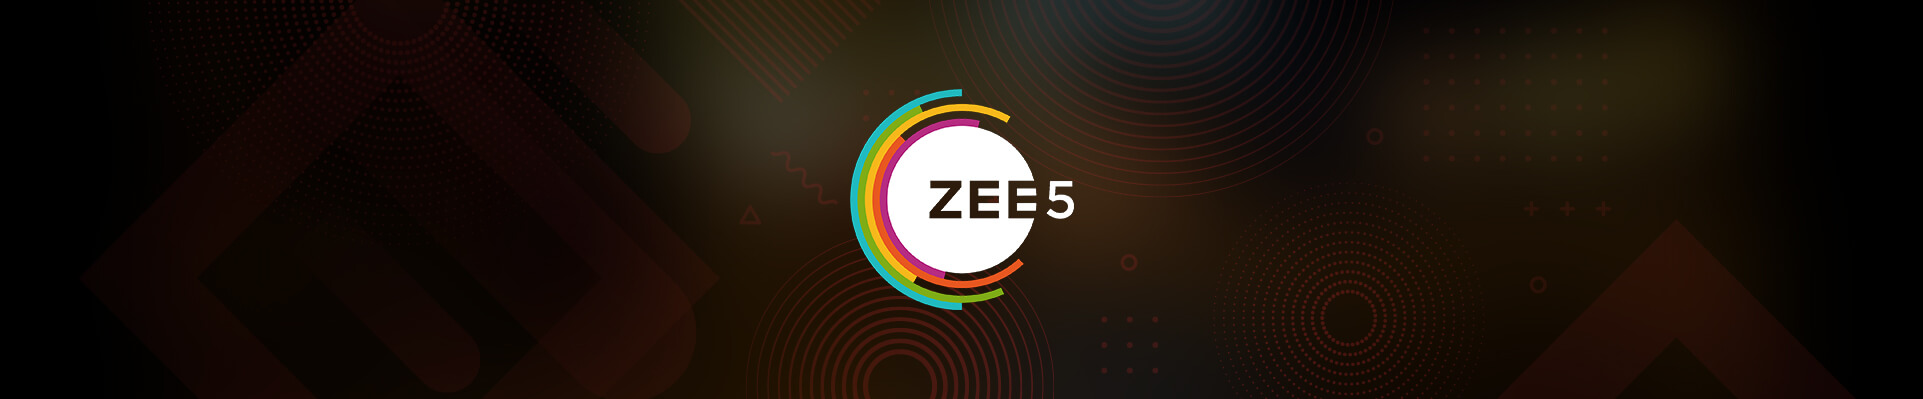 How to get a Zee5 Subscription for Free